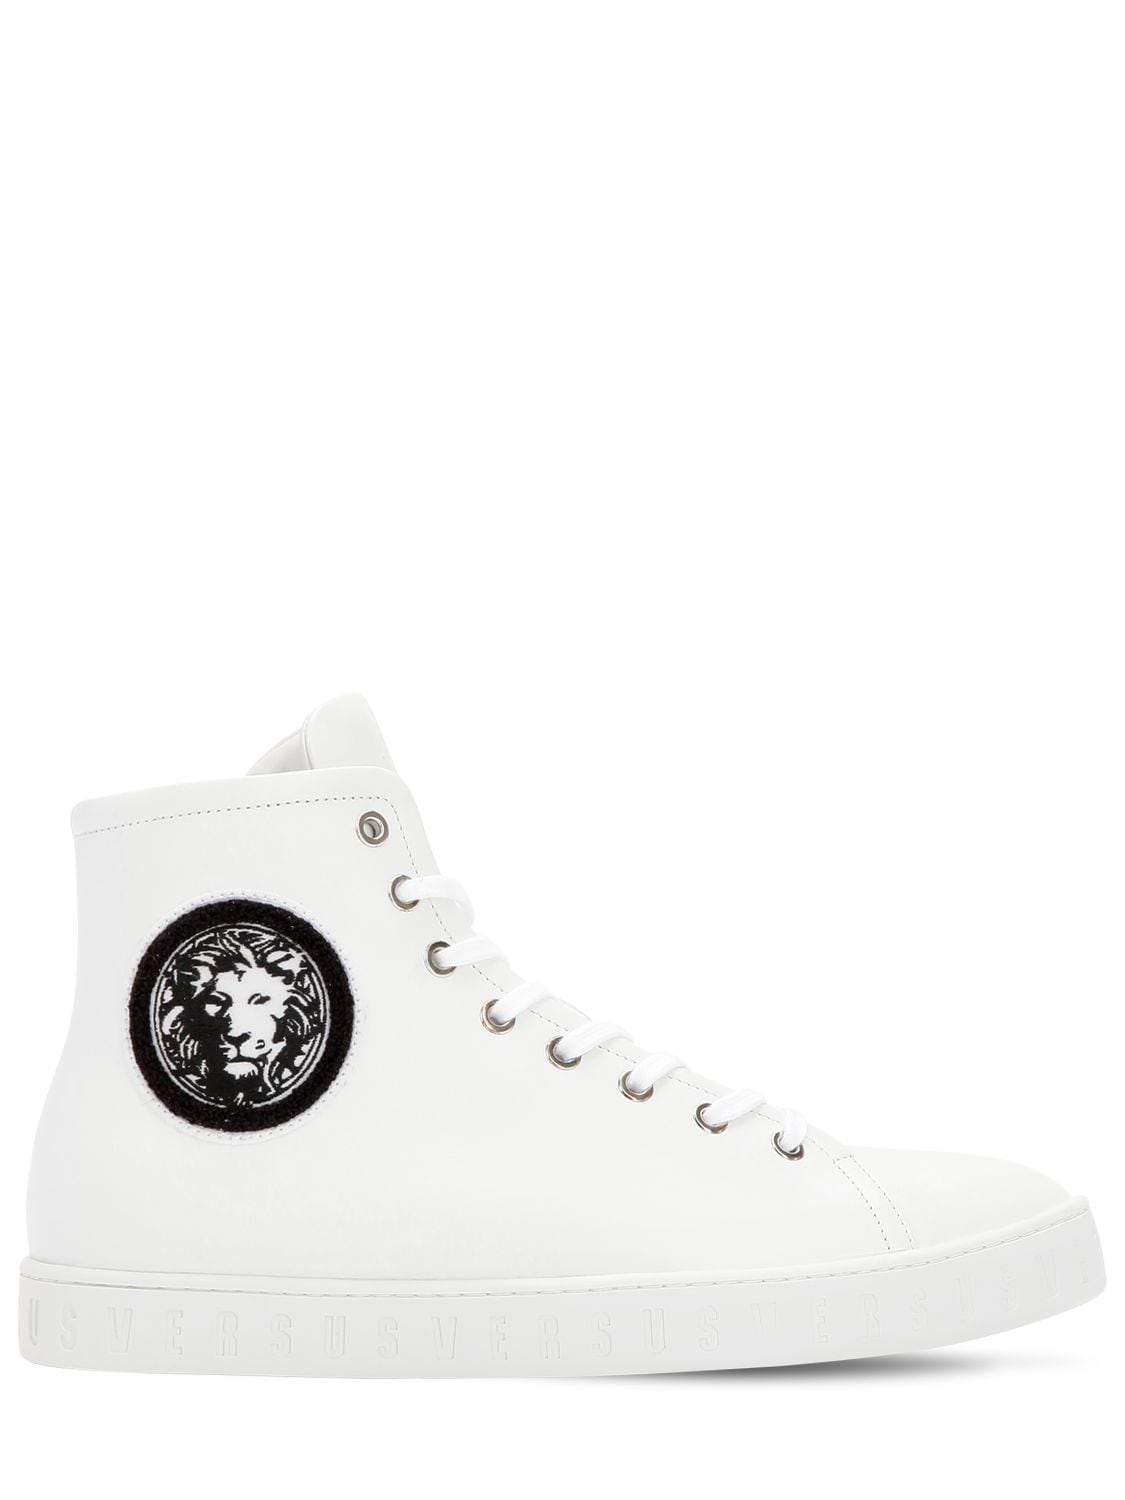 Versus Lion Head Leather High Top Sneakers In White